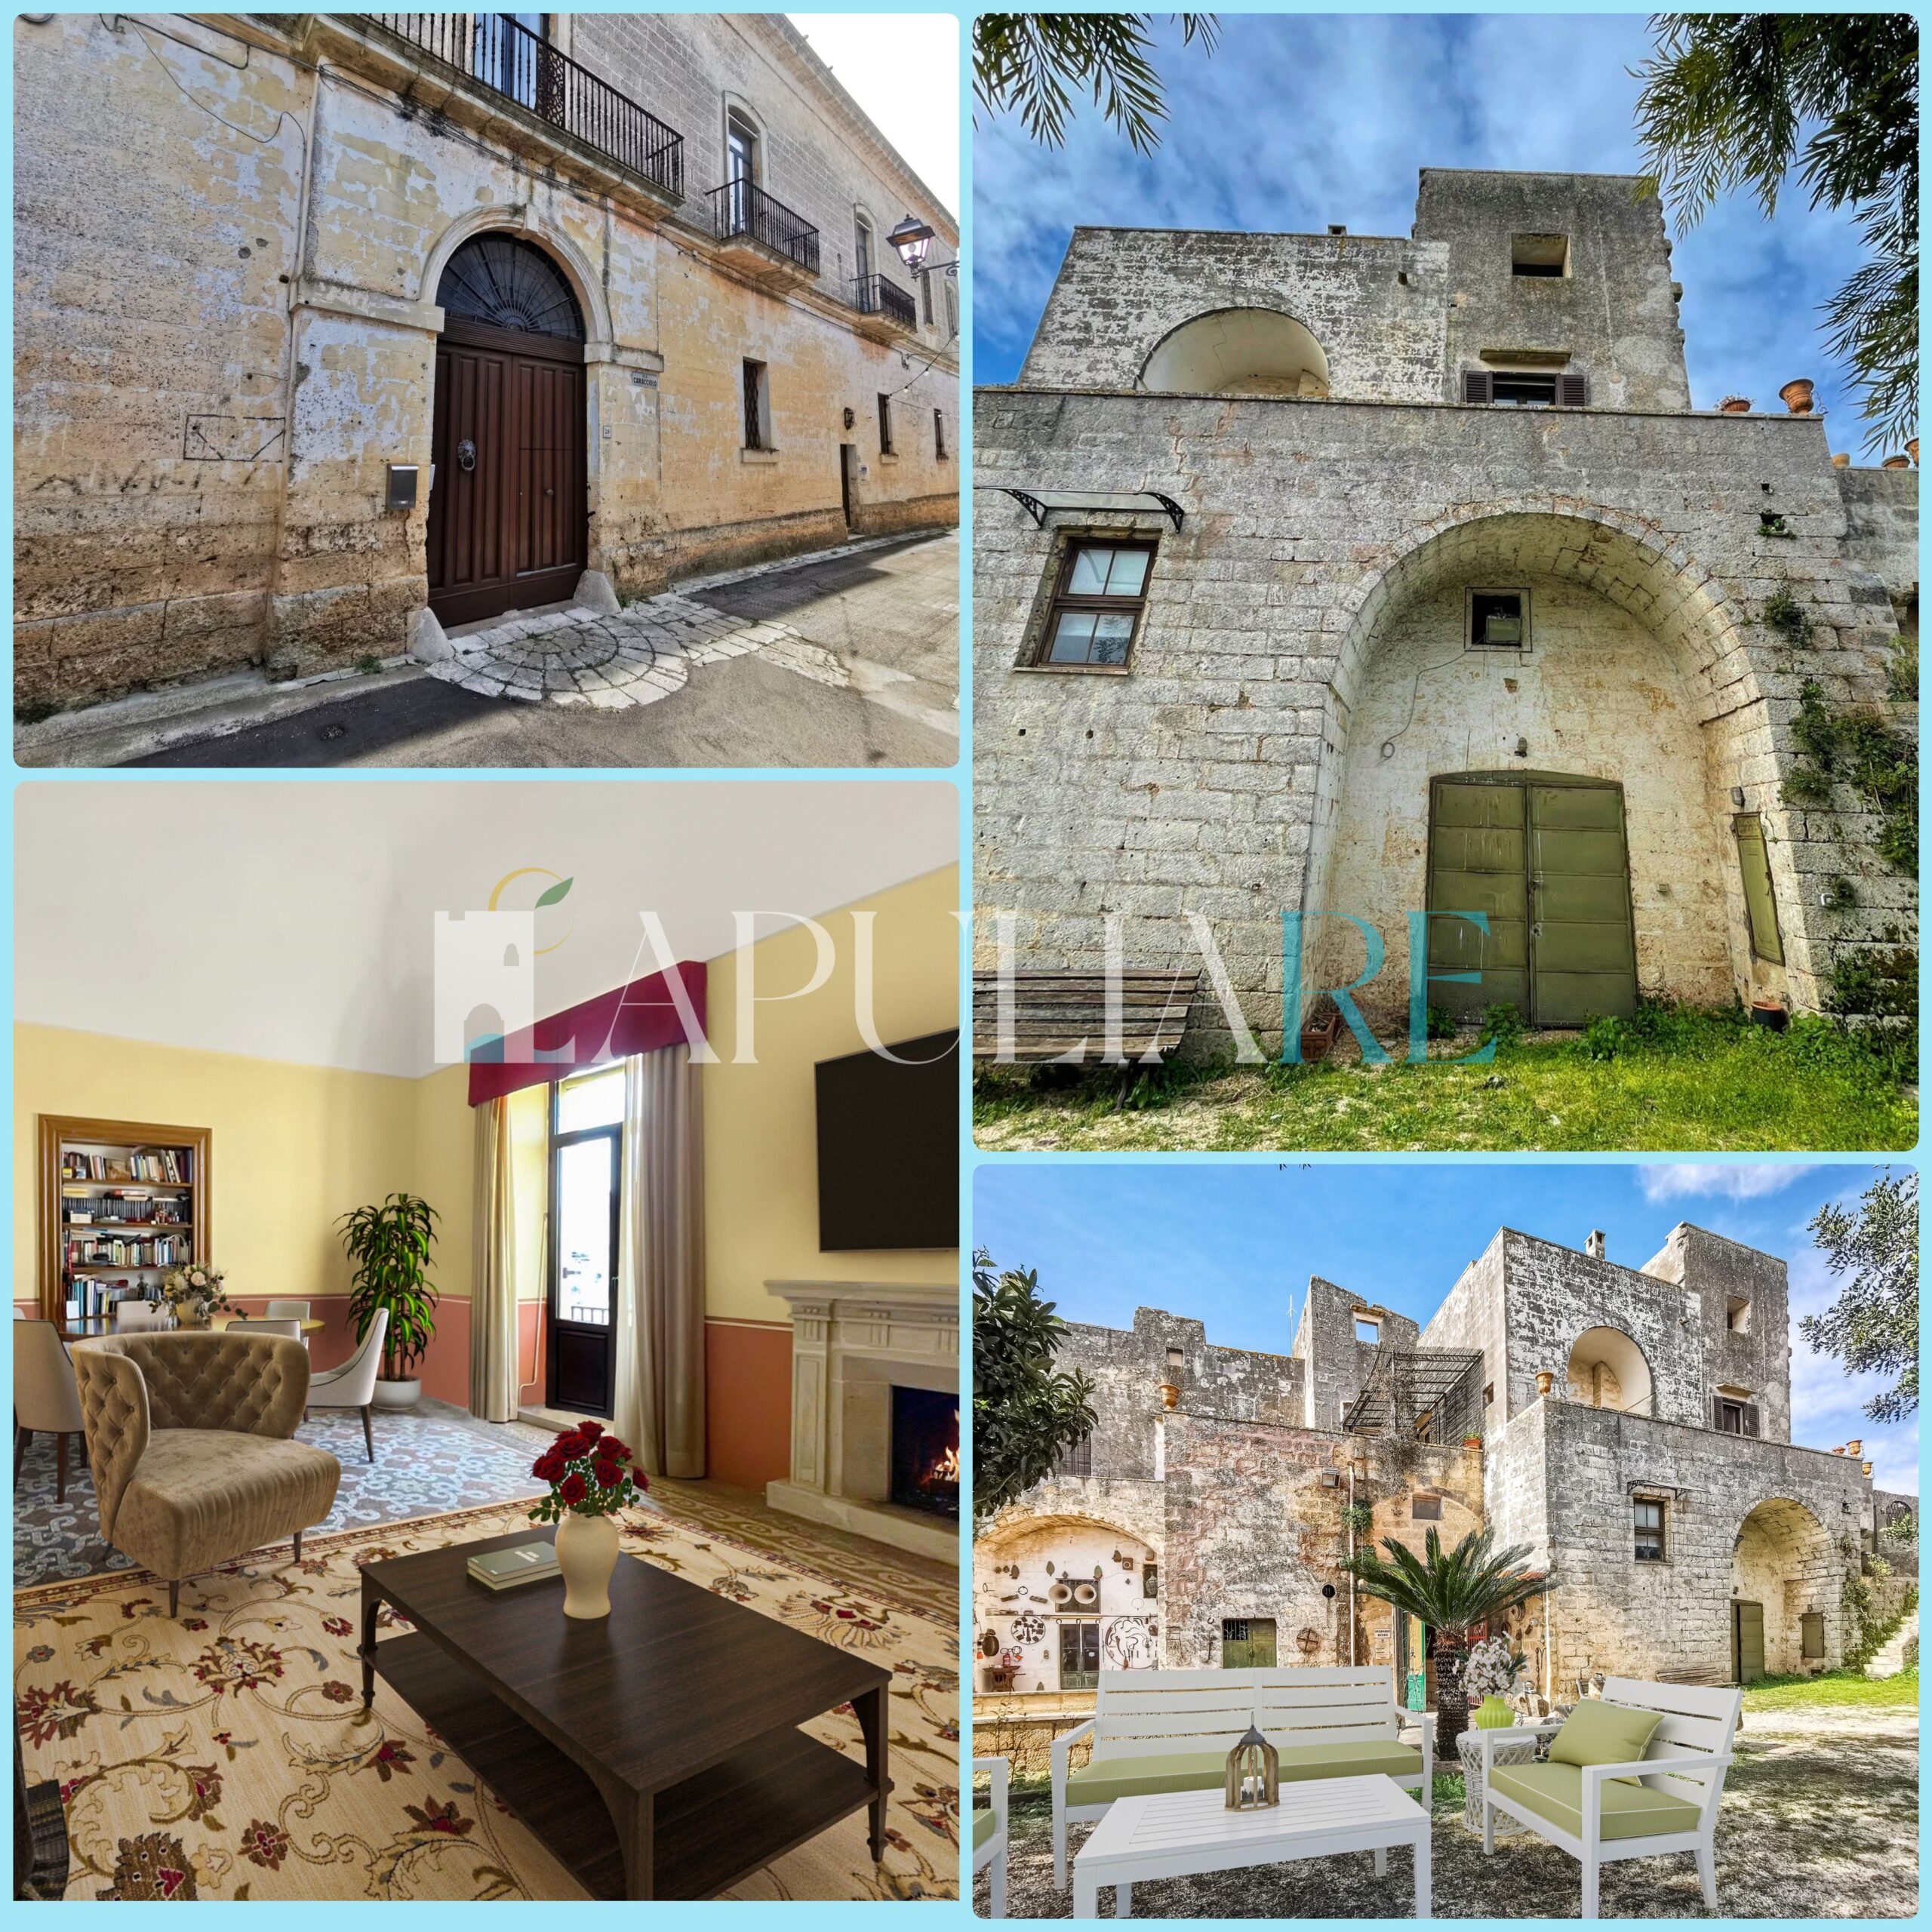 TPD131 -SALENTO – APULIA – HISTORICAL NOBLE PALACE/MASSERIA OF 1000 SQM WITH PRECIOUS VAULTS AND MOSAICS.